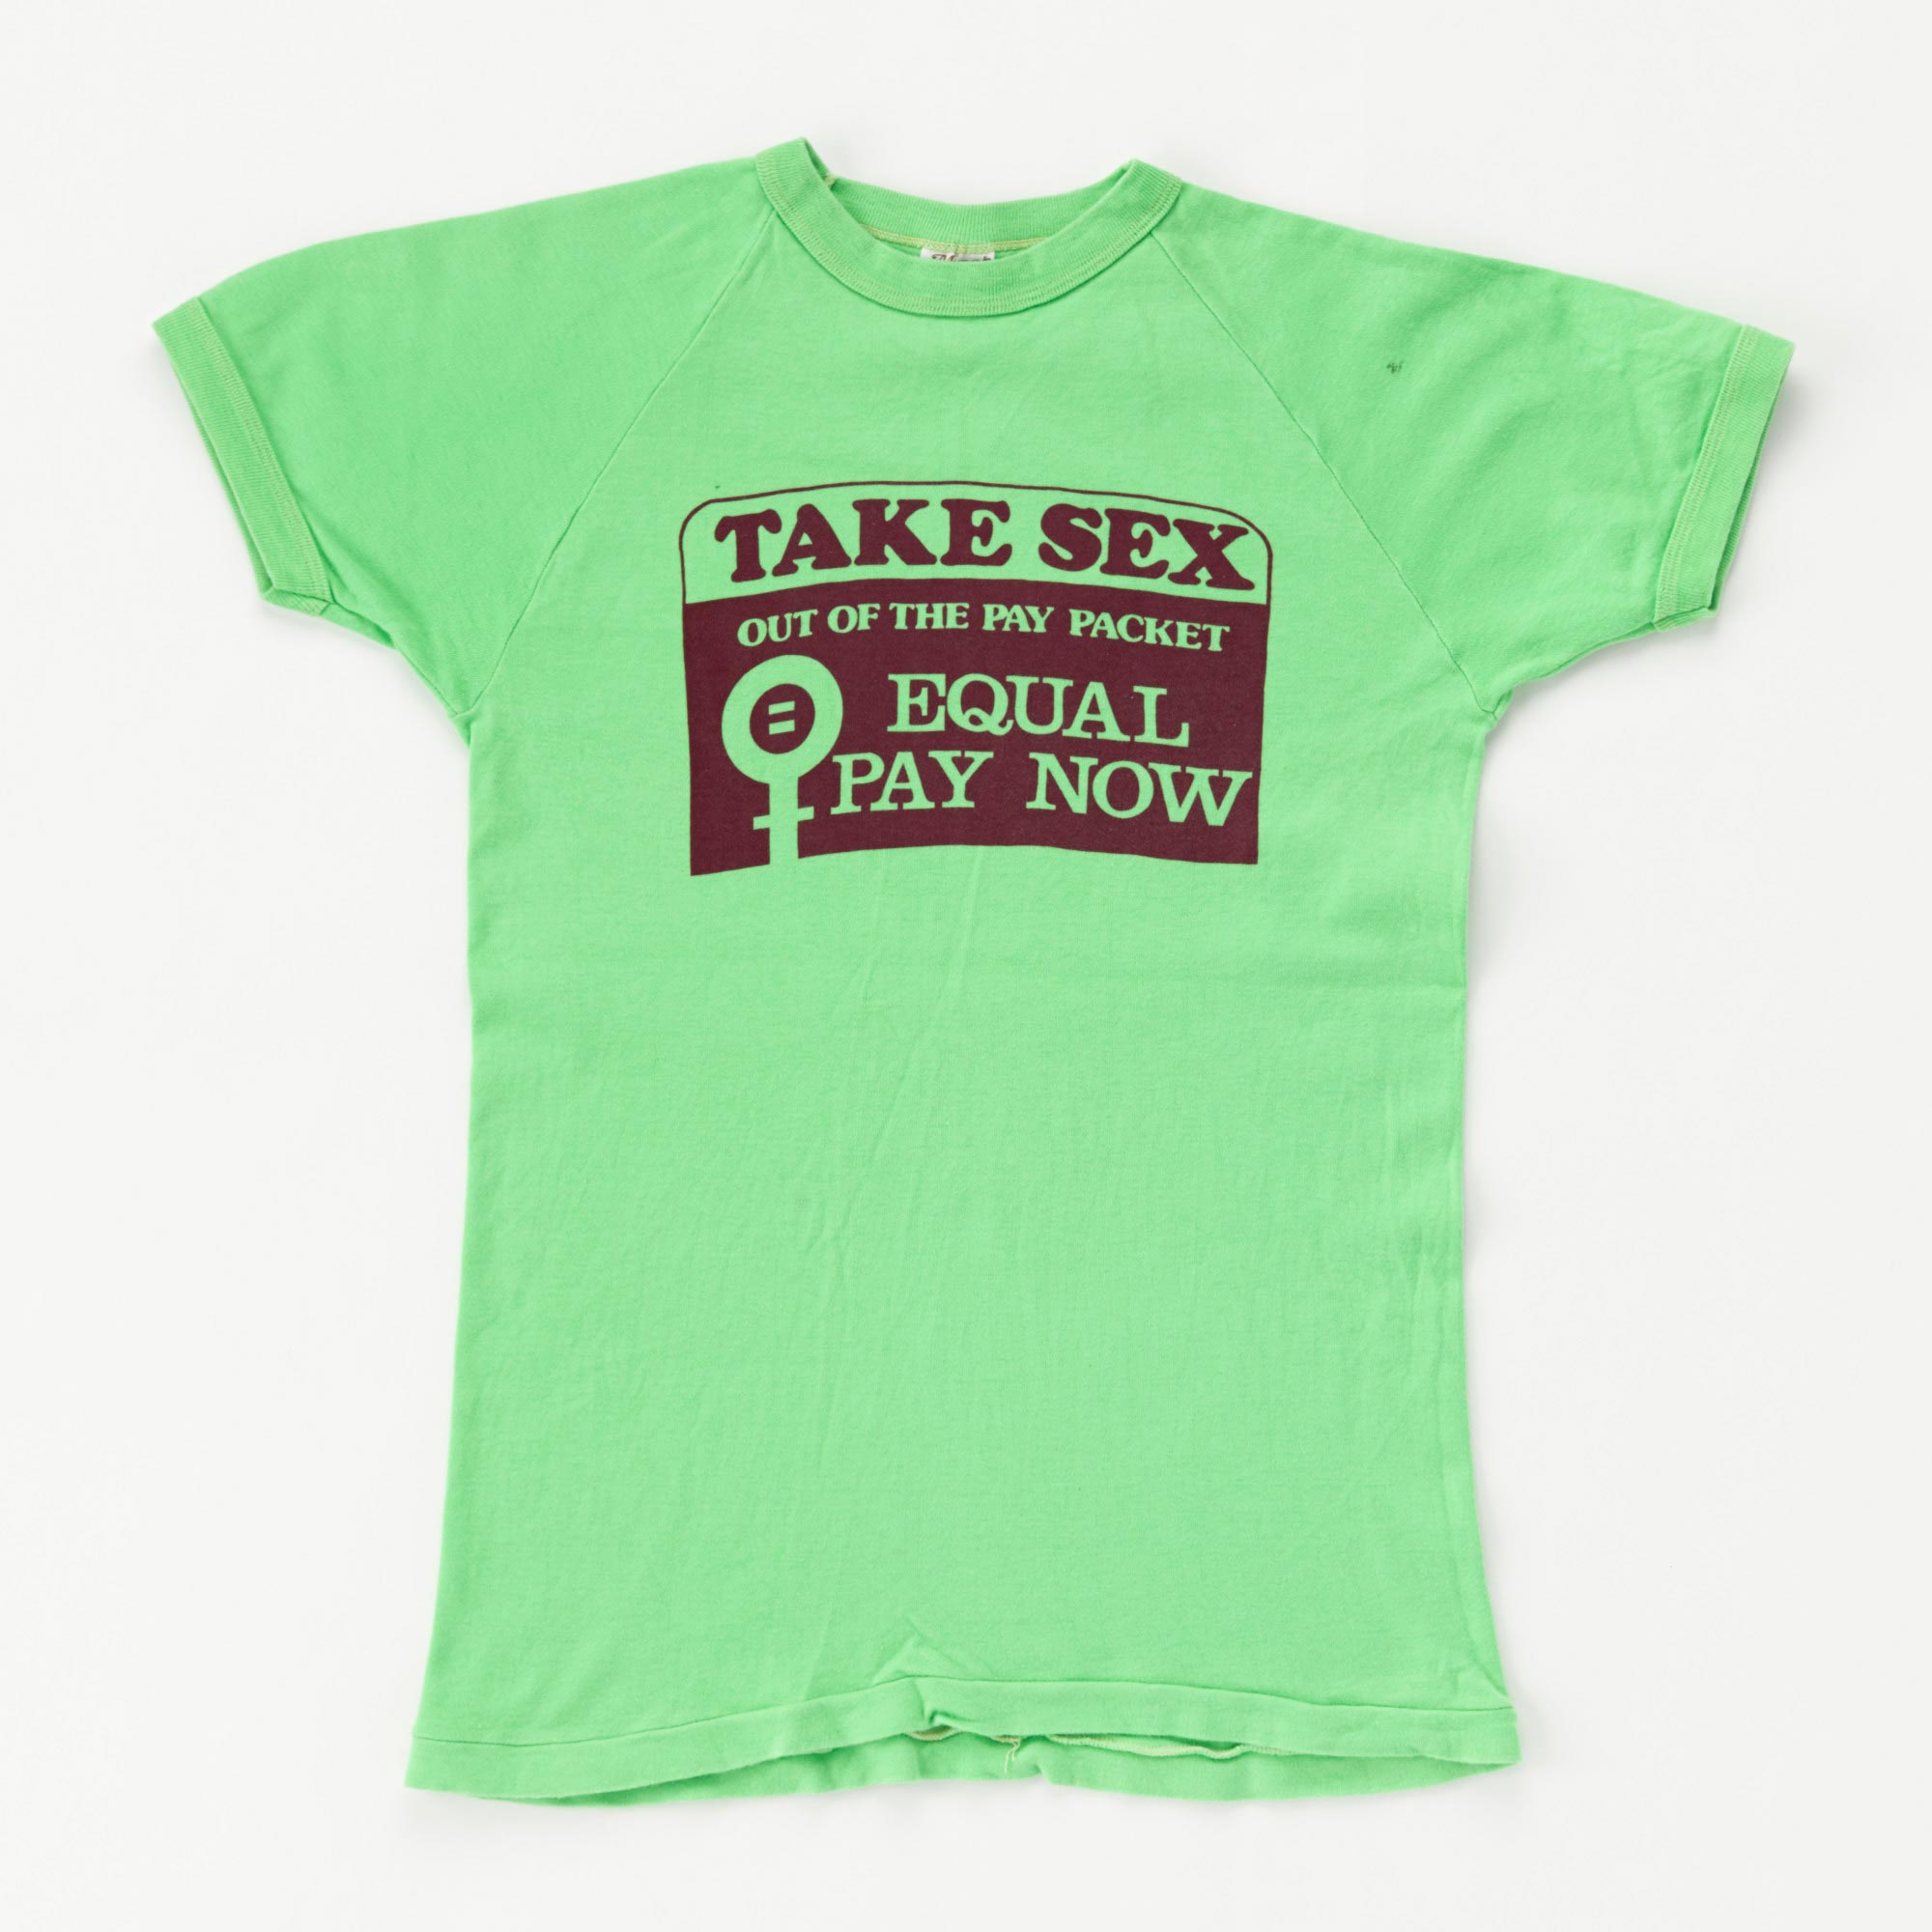 ‘Take sex out of the pay packet, equal pay now’ printed t-shirt.